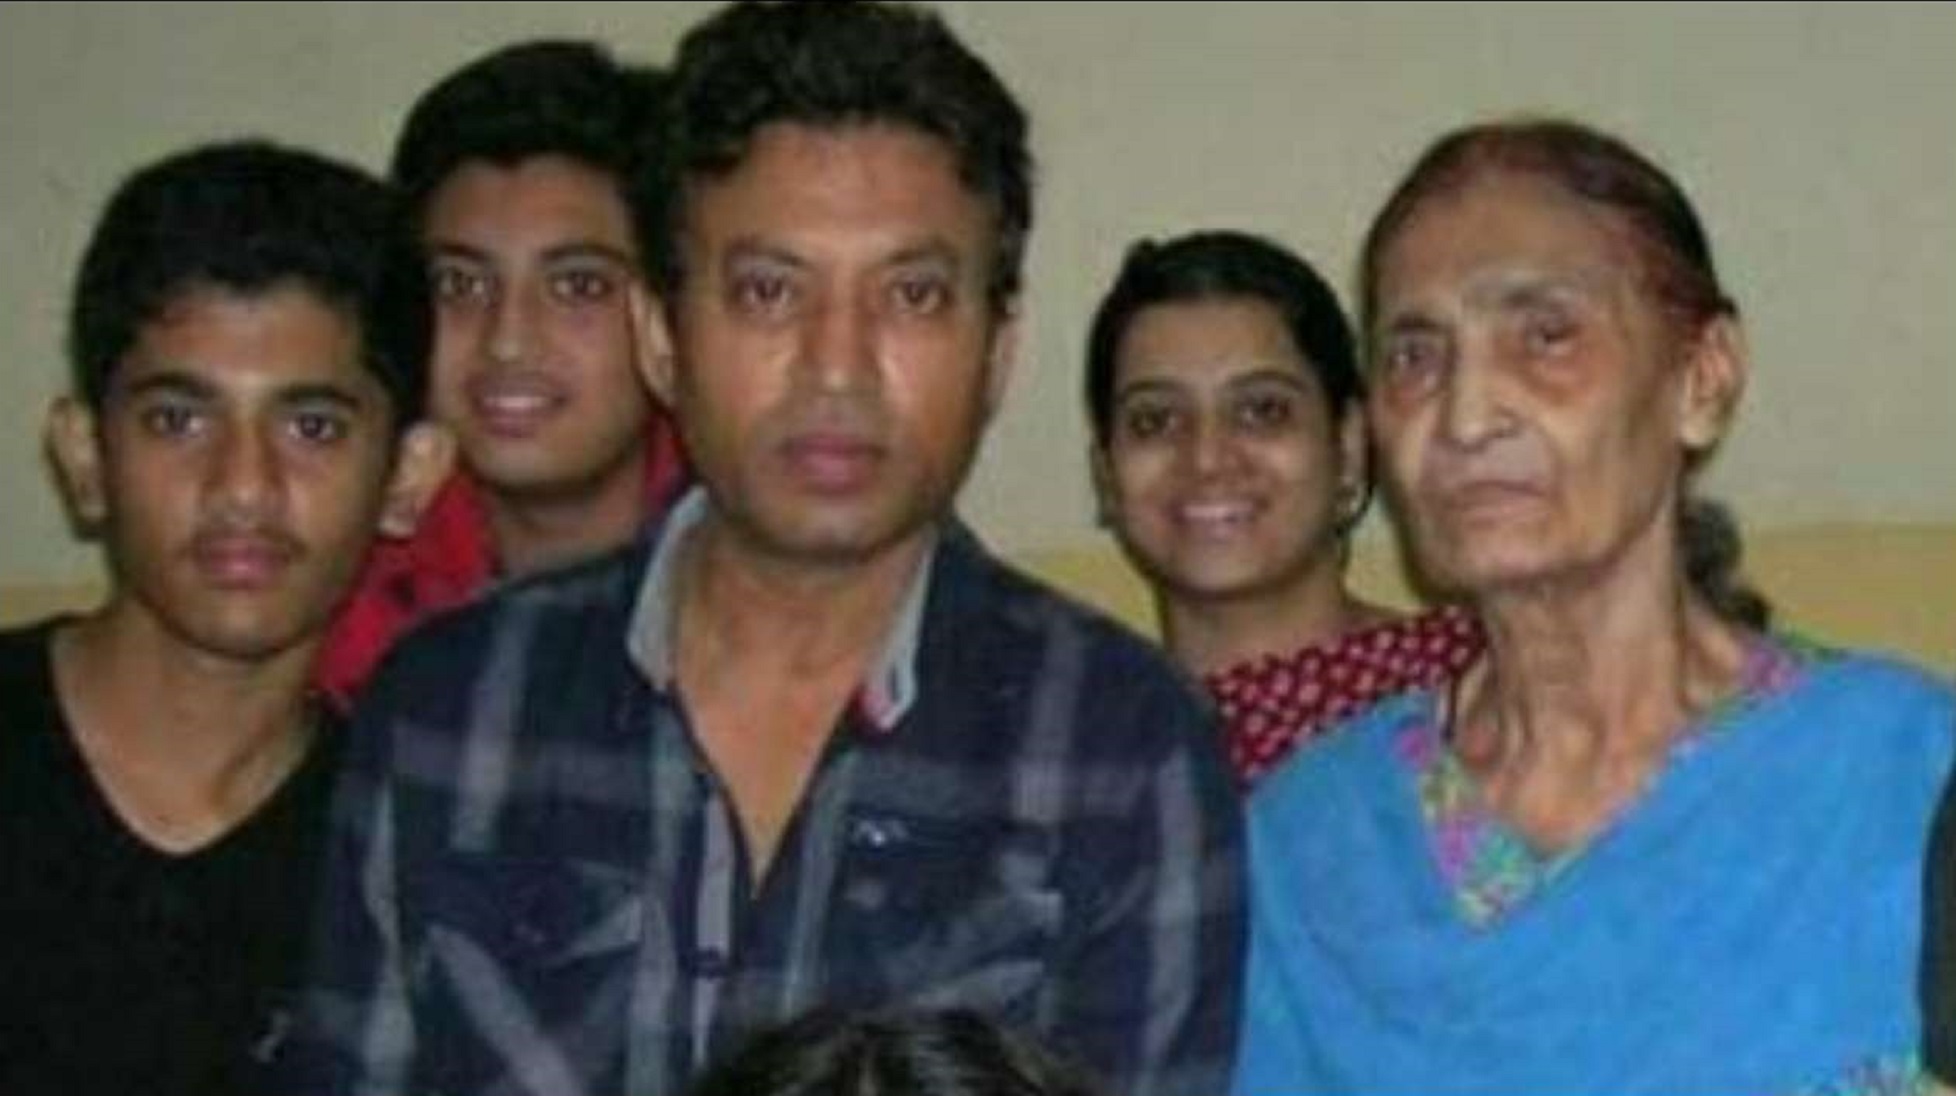 In His Last Words, Irrfan Khan Referenced His Mother Who Died a Few Days Before Him